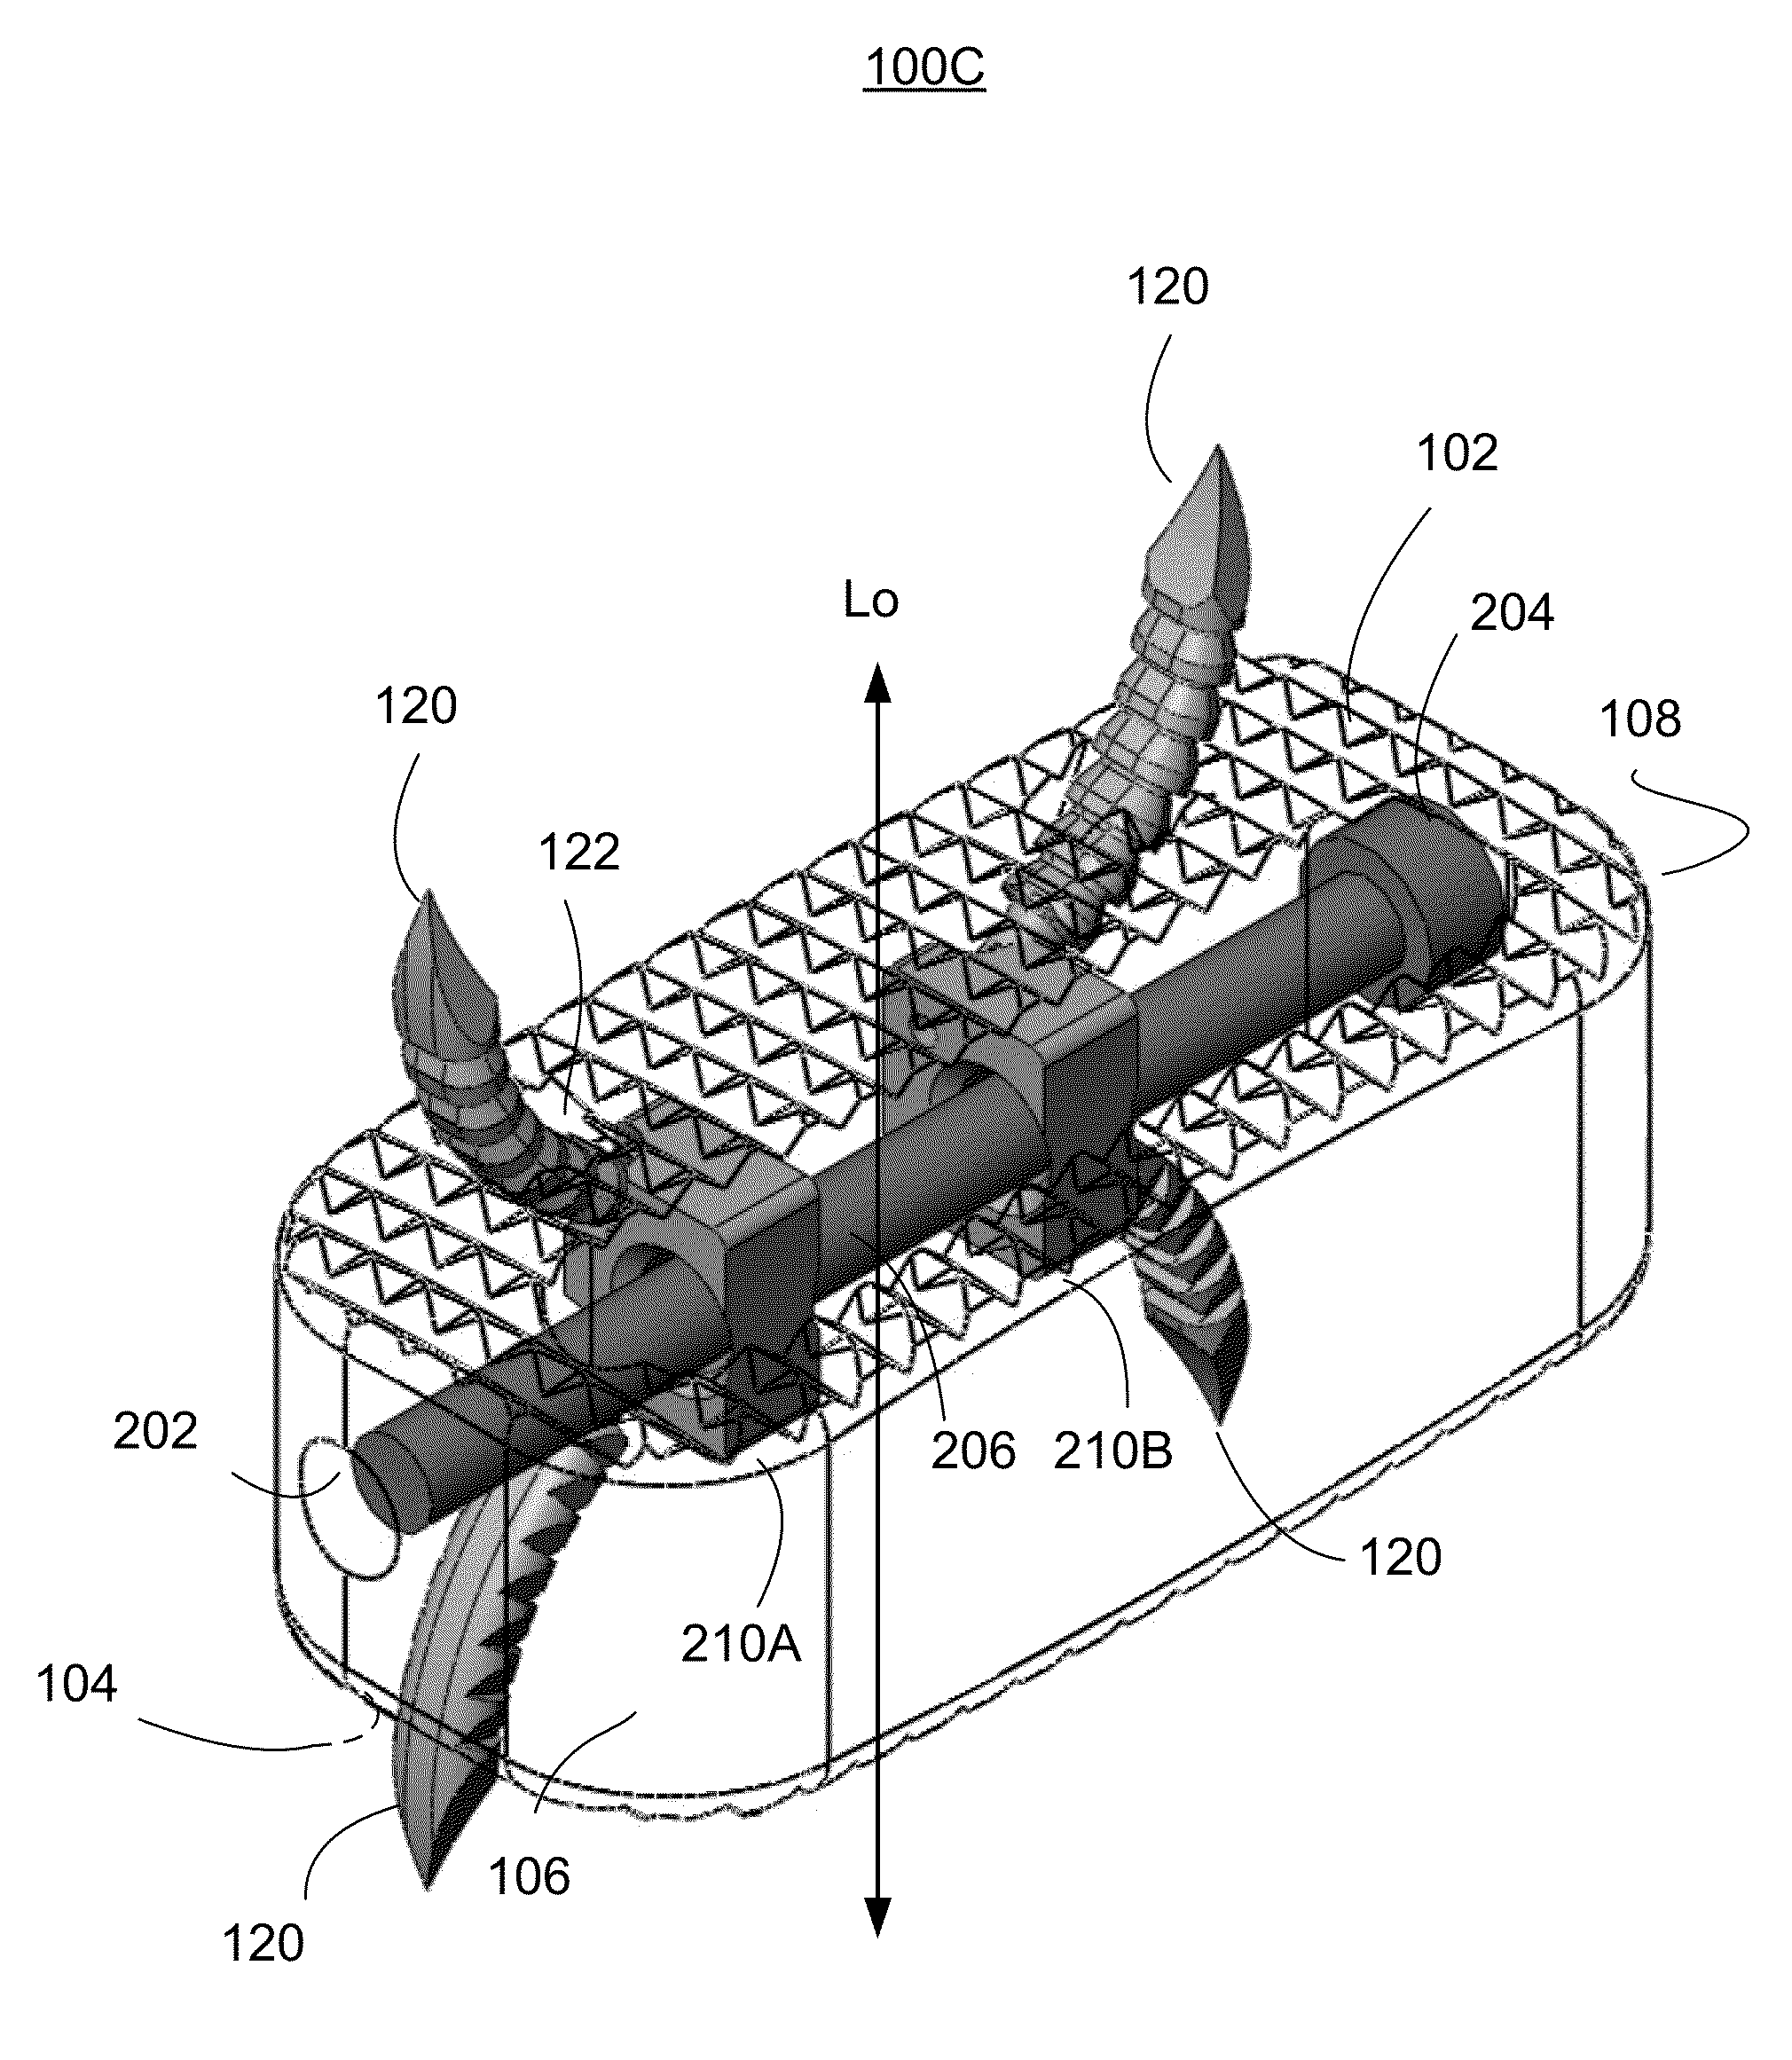 Interbody vertebral prosthetic and orthopedic fusion device with self-deploying anchors